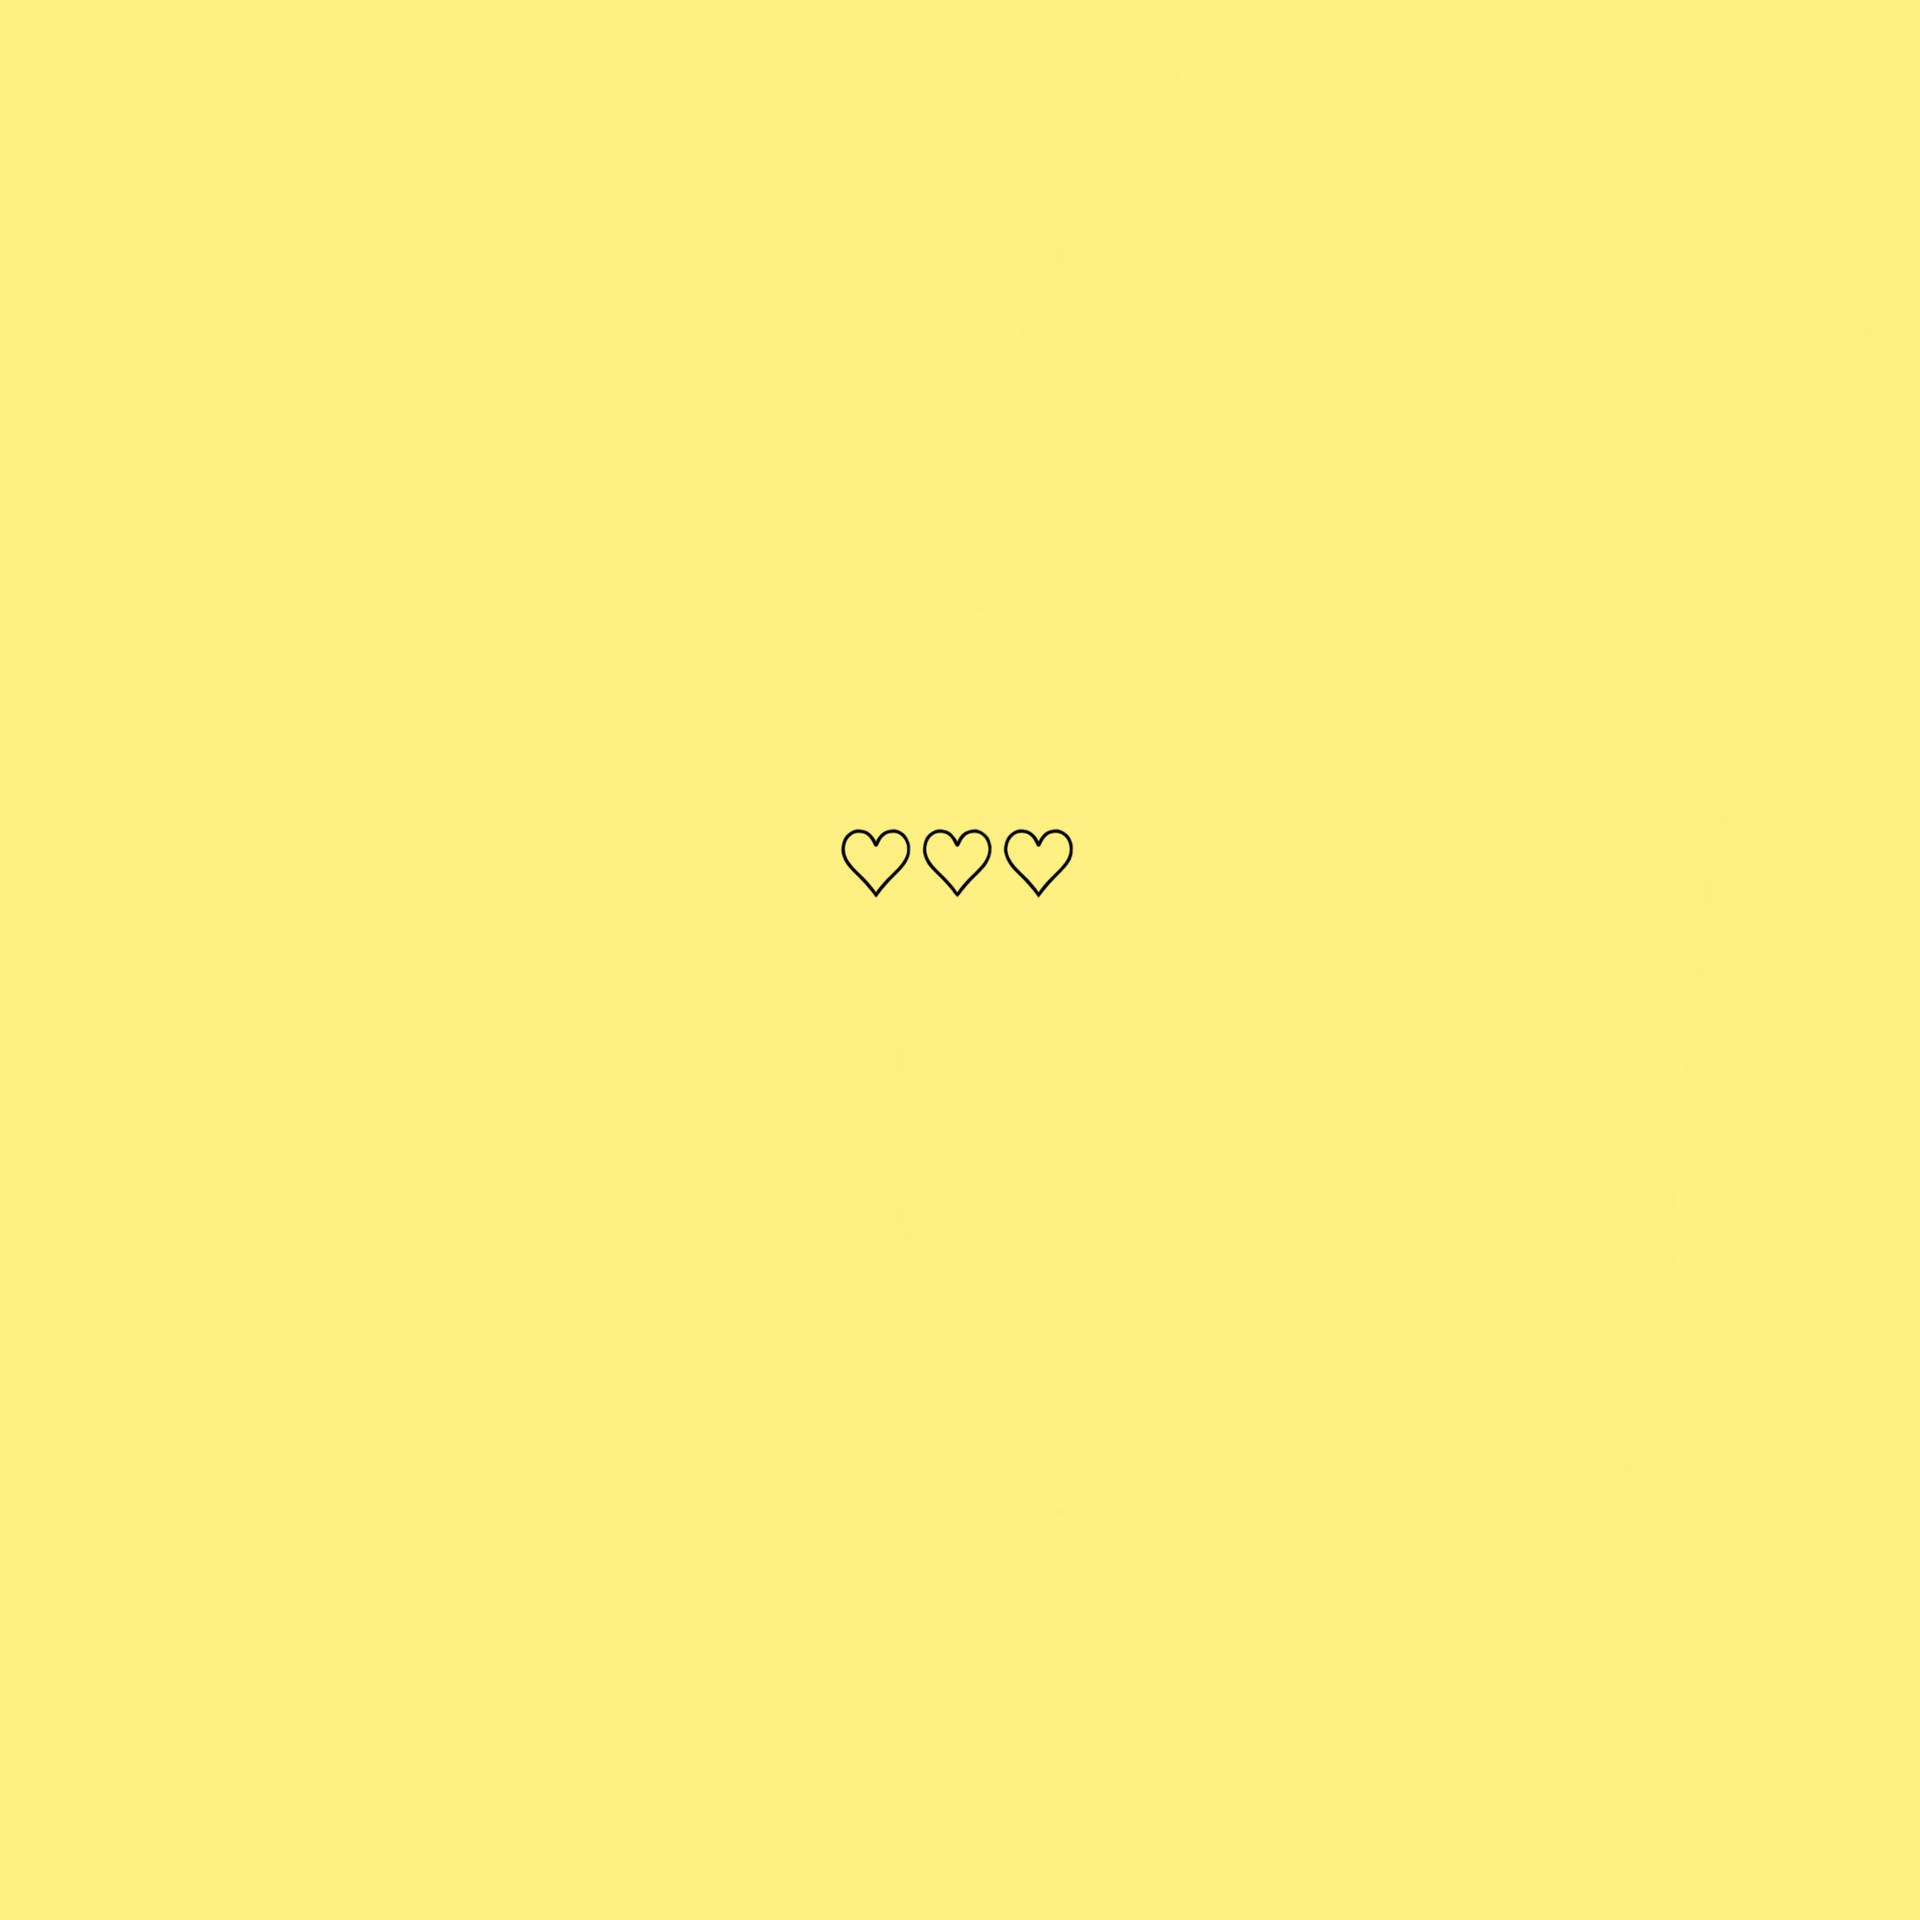 Pastel Yellow Aesthetic With Hearts Background